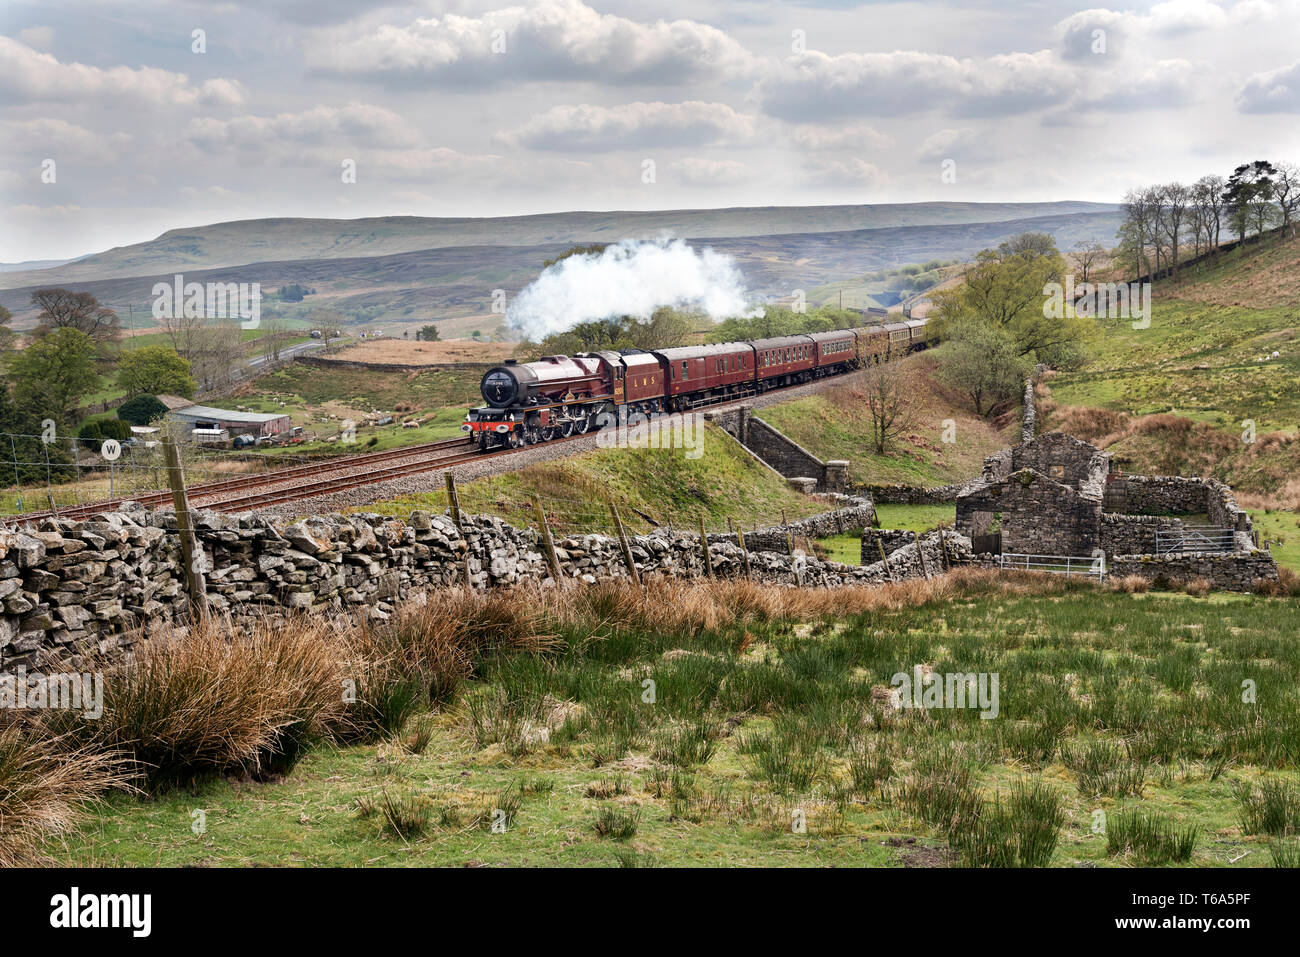 Garsdale, Cumbria, UK. 30th Apr 2019. Vintage steam locomotive 'Princess Elizabeth' on 'The Dalesman' steam special. The train ran from Hellifield to Carlisle and return along the famous Settle-Carlisle line, with a diesel connection to the York starting point. Seen here at Lund, near Garsdale in the Yorkshire Dales National Park. The locomotive has been recently restored to mainline running condition. This was the first 'Dalesman' special of 2019: there are regular specials through the Spring and Summer seasons. Credit: John Bentley/Alamy Live News Stock Photo